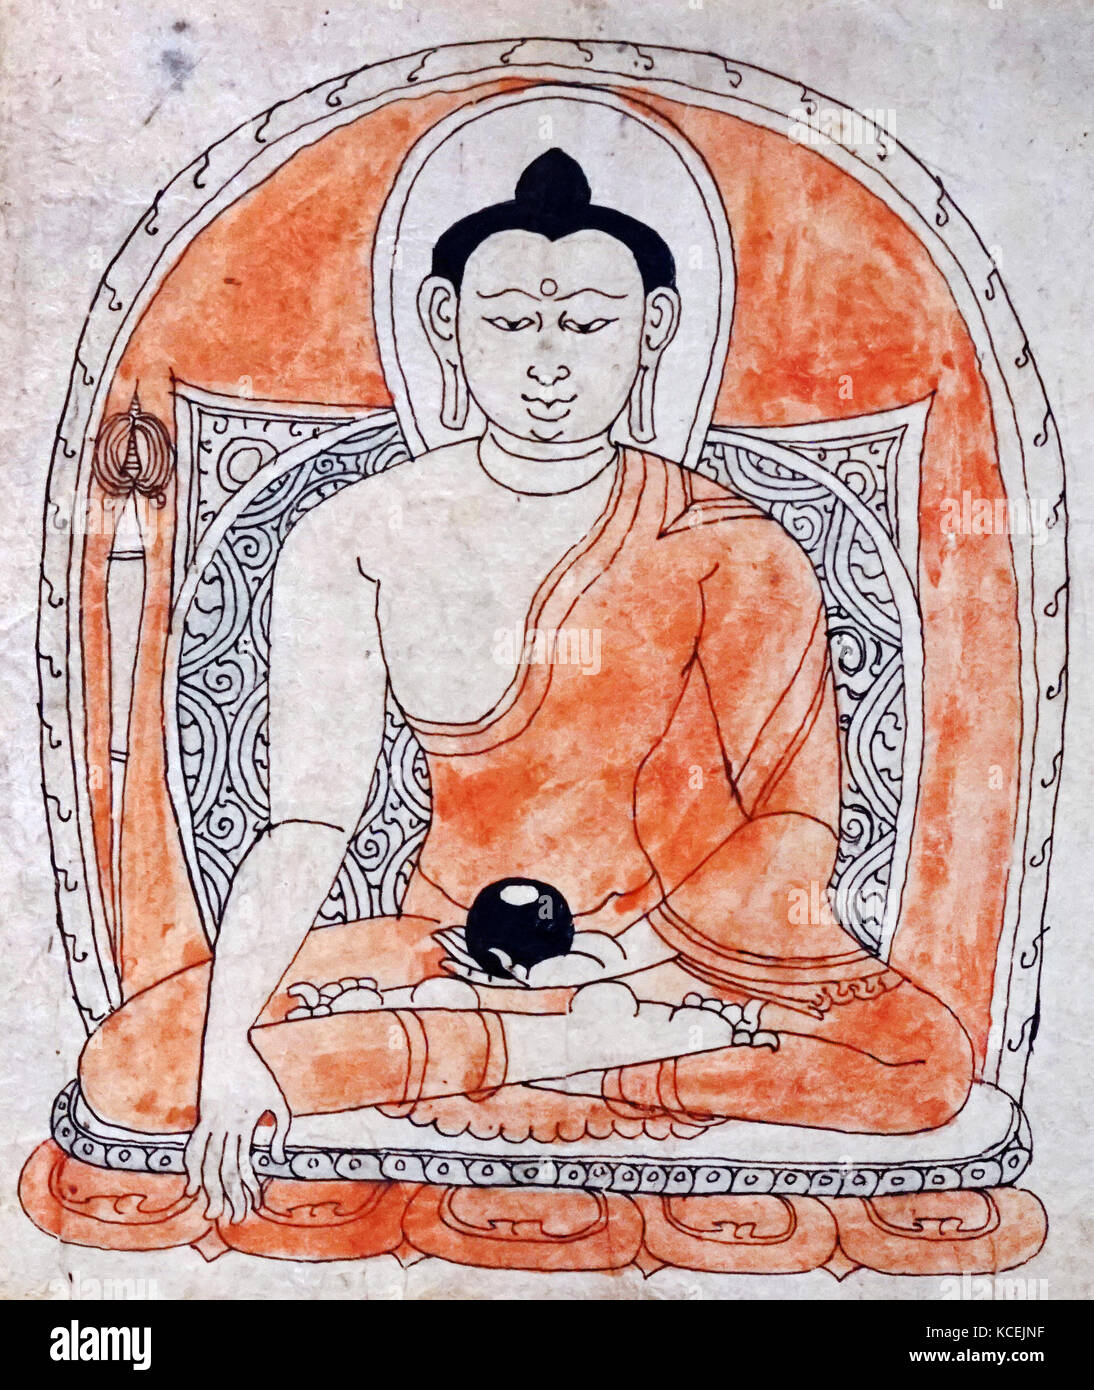 Consecration Drawing depicting the Gautama Buddha, also known as Siddhartha Gautama, Shakyamuni Buddha, on whose teachings Buddhism was founded., 1450-1600 AD. drawn in a Nepalese style. Paper, ink and watercolour Tibet Stock Photo